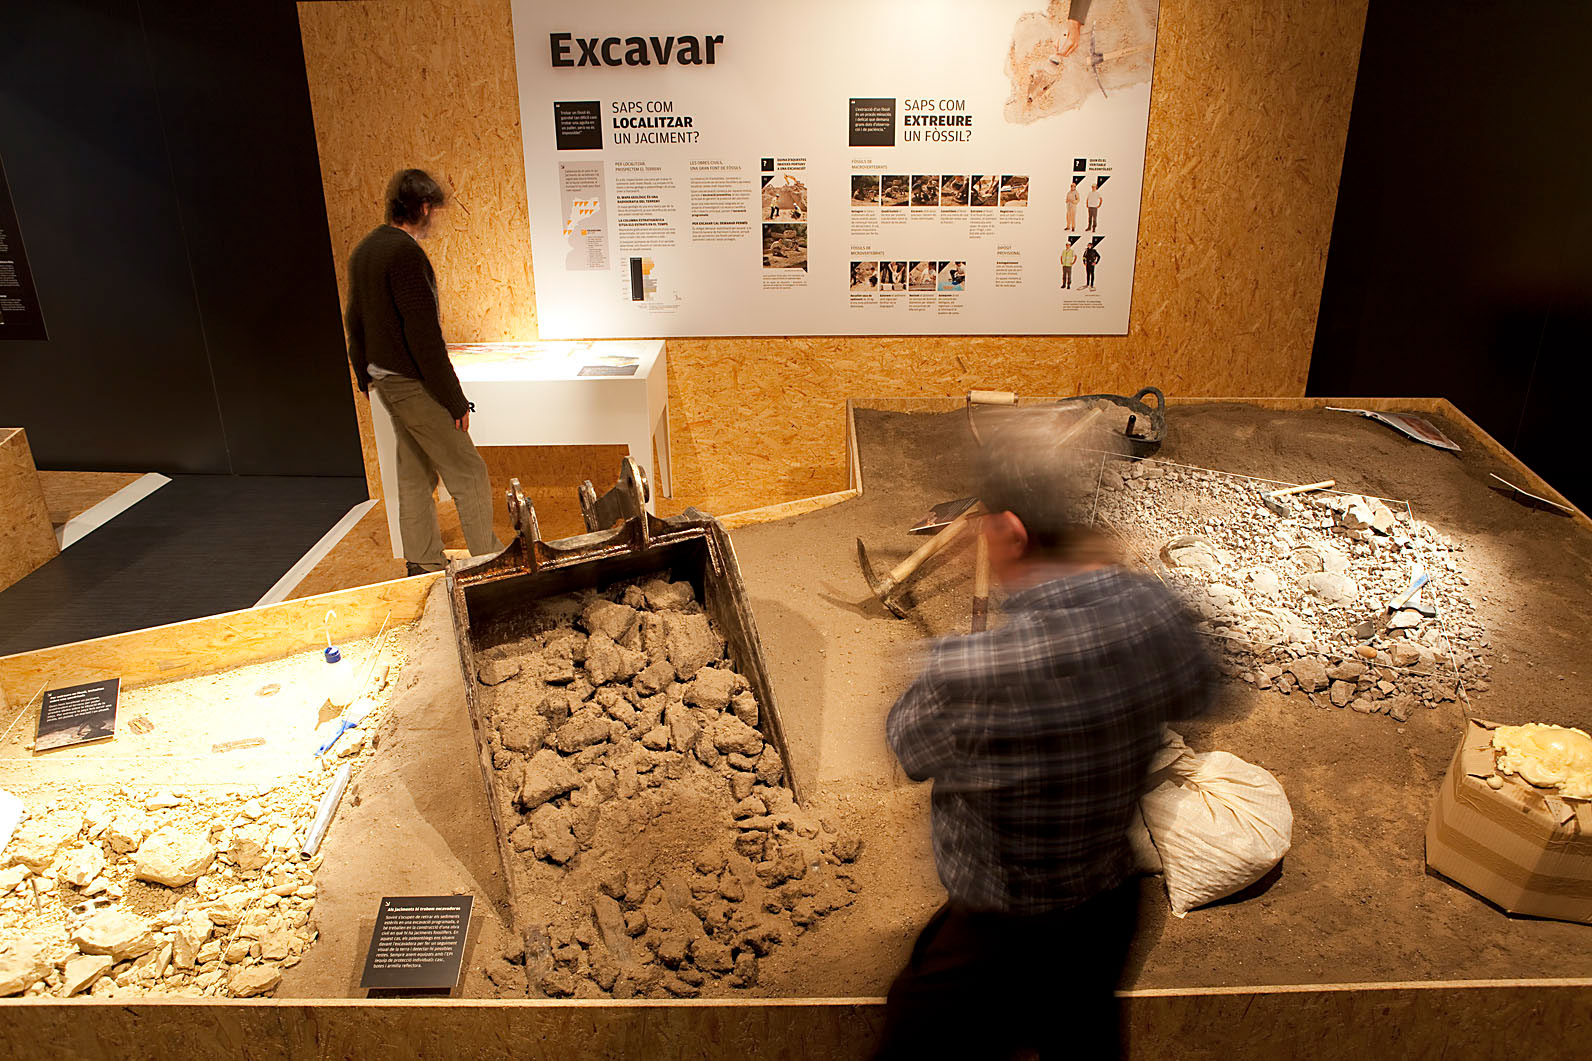 The Application of Physical Models in the Cultural Field